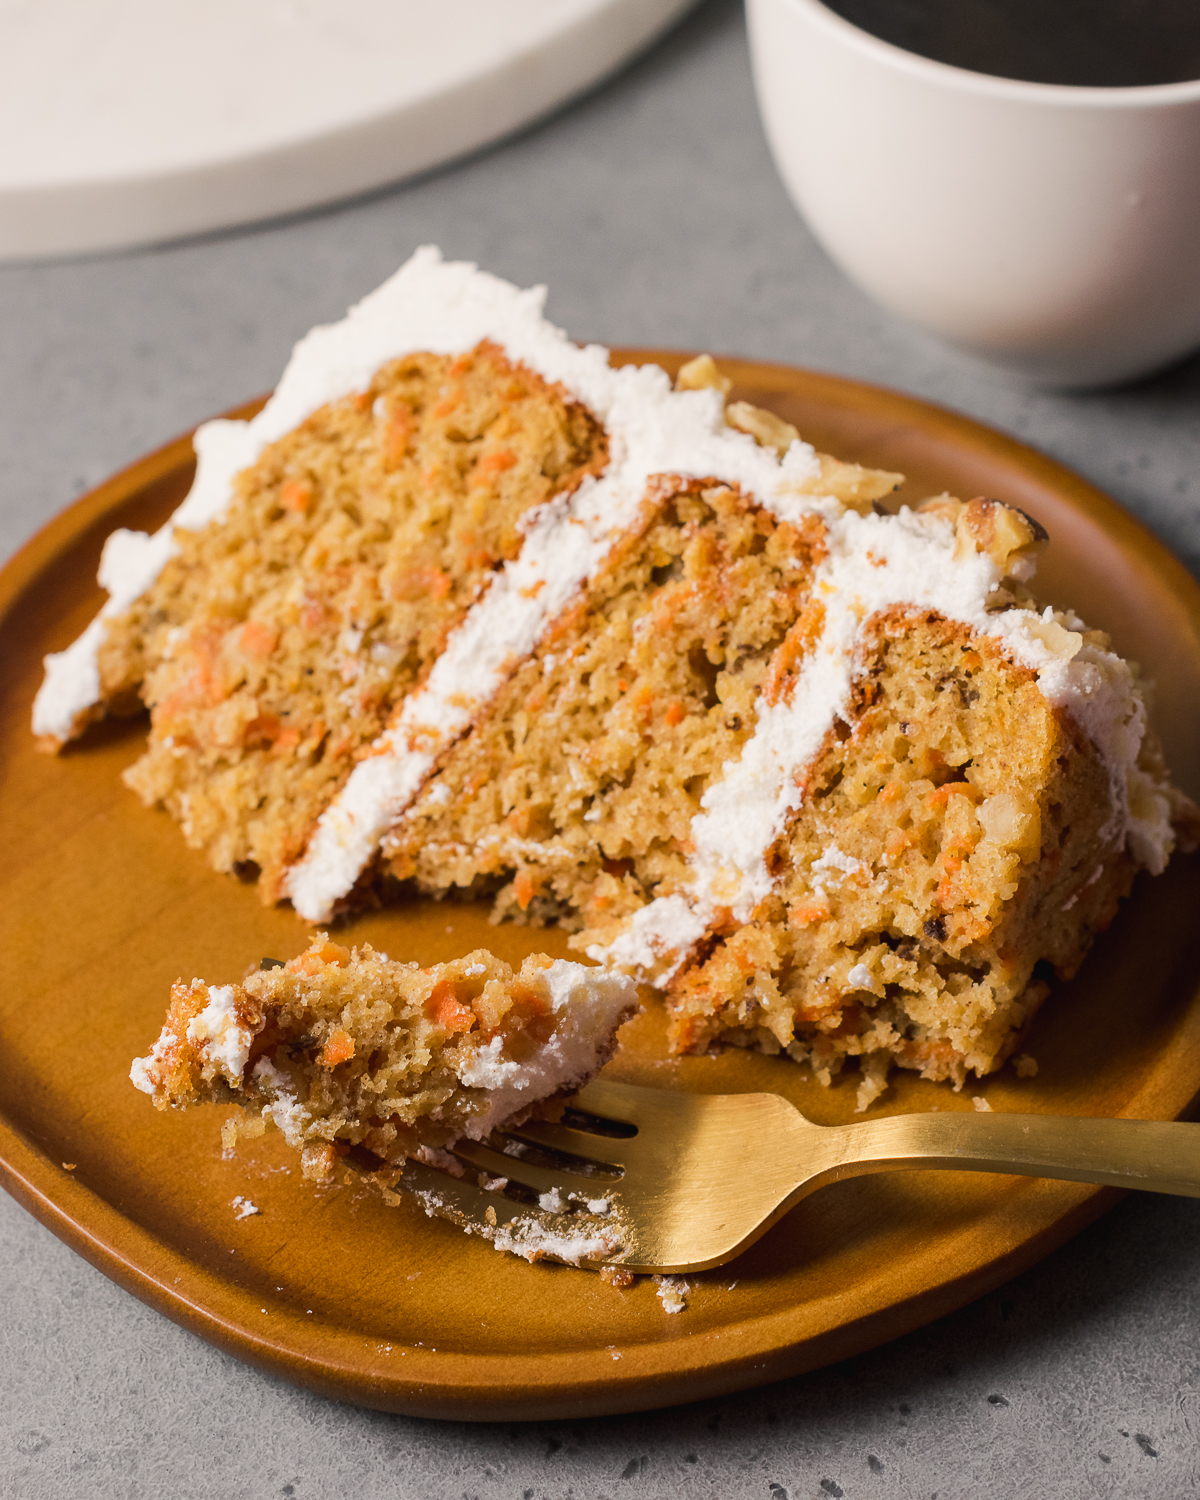 Slice of carrot cake on a wooden plate.